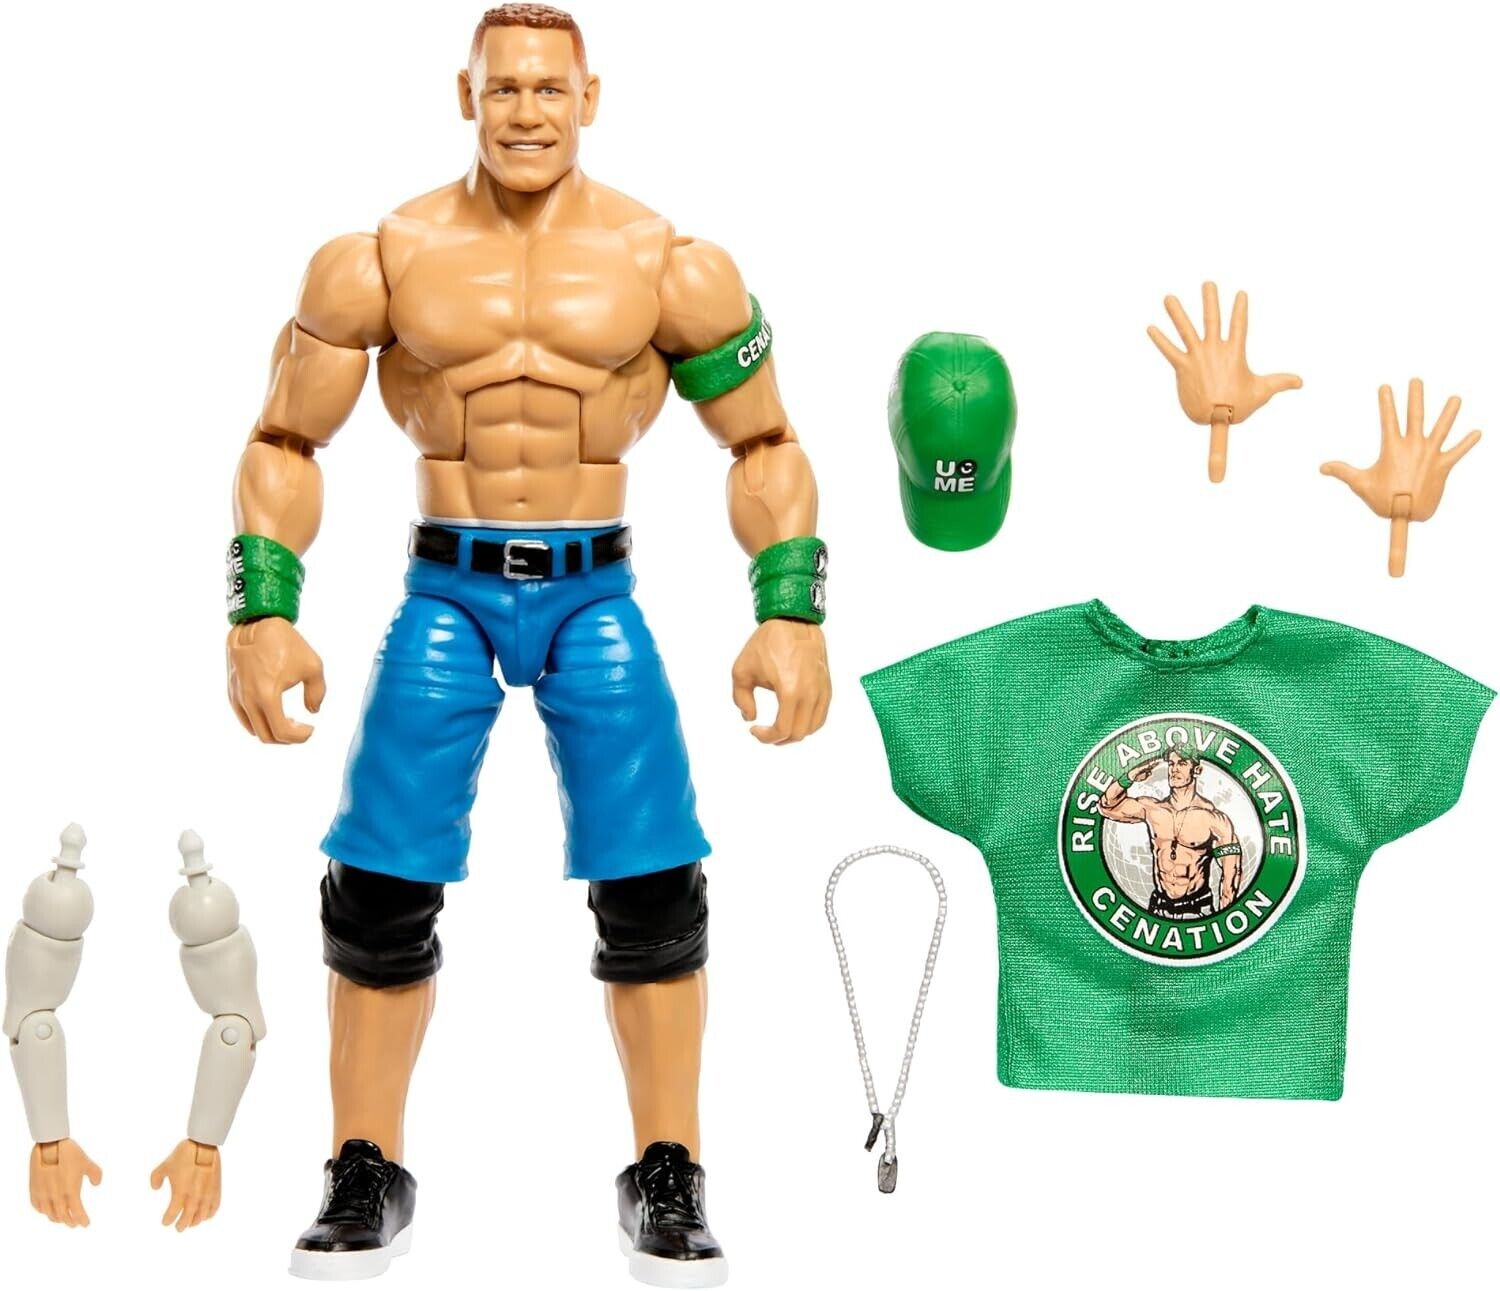 WWE Elite Action Figure WrestleMania with Accessory and Nicholas Build-A-Figure